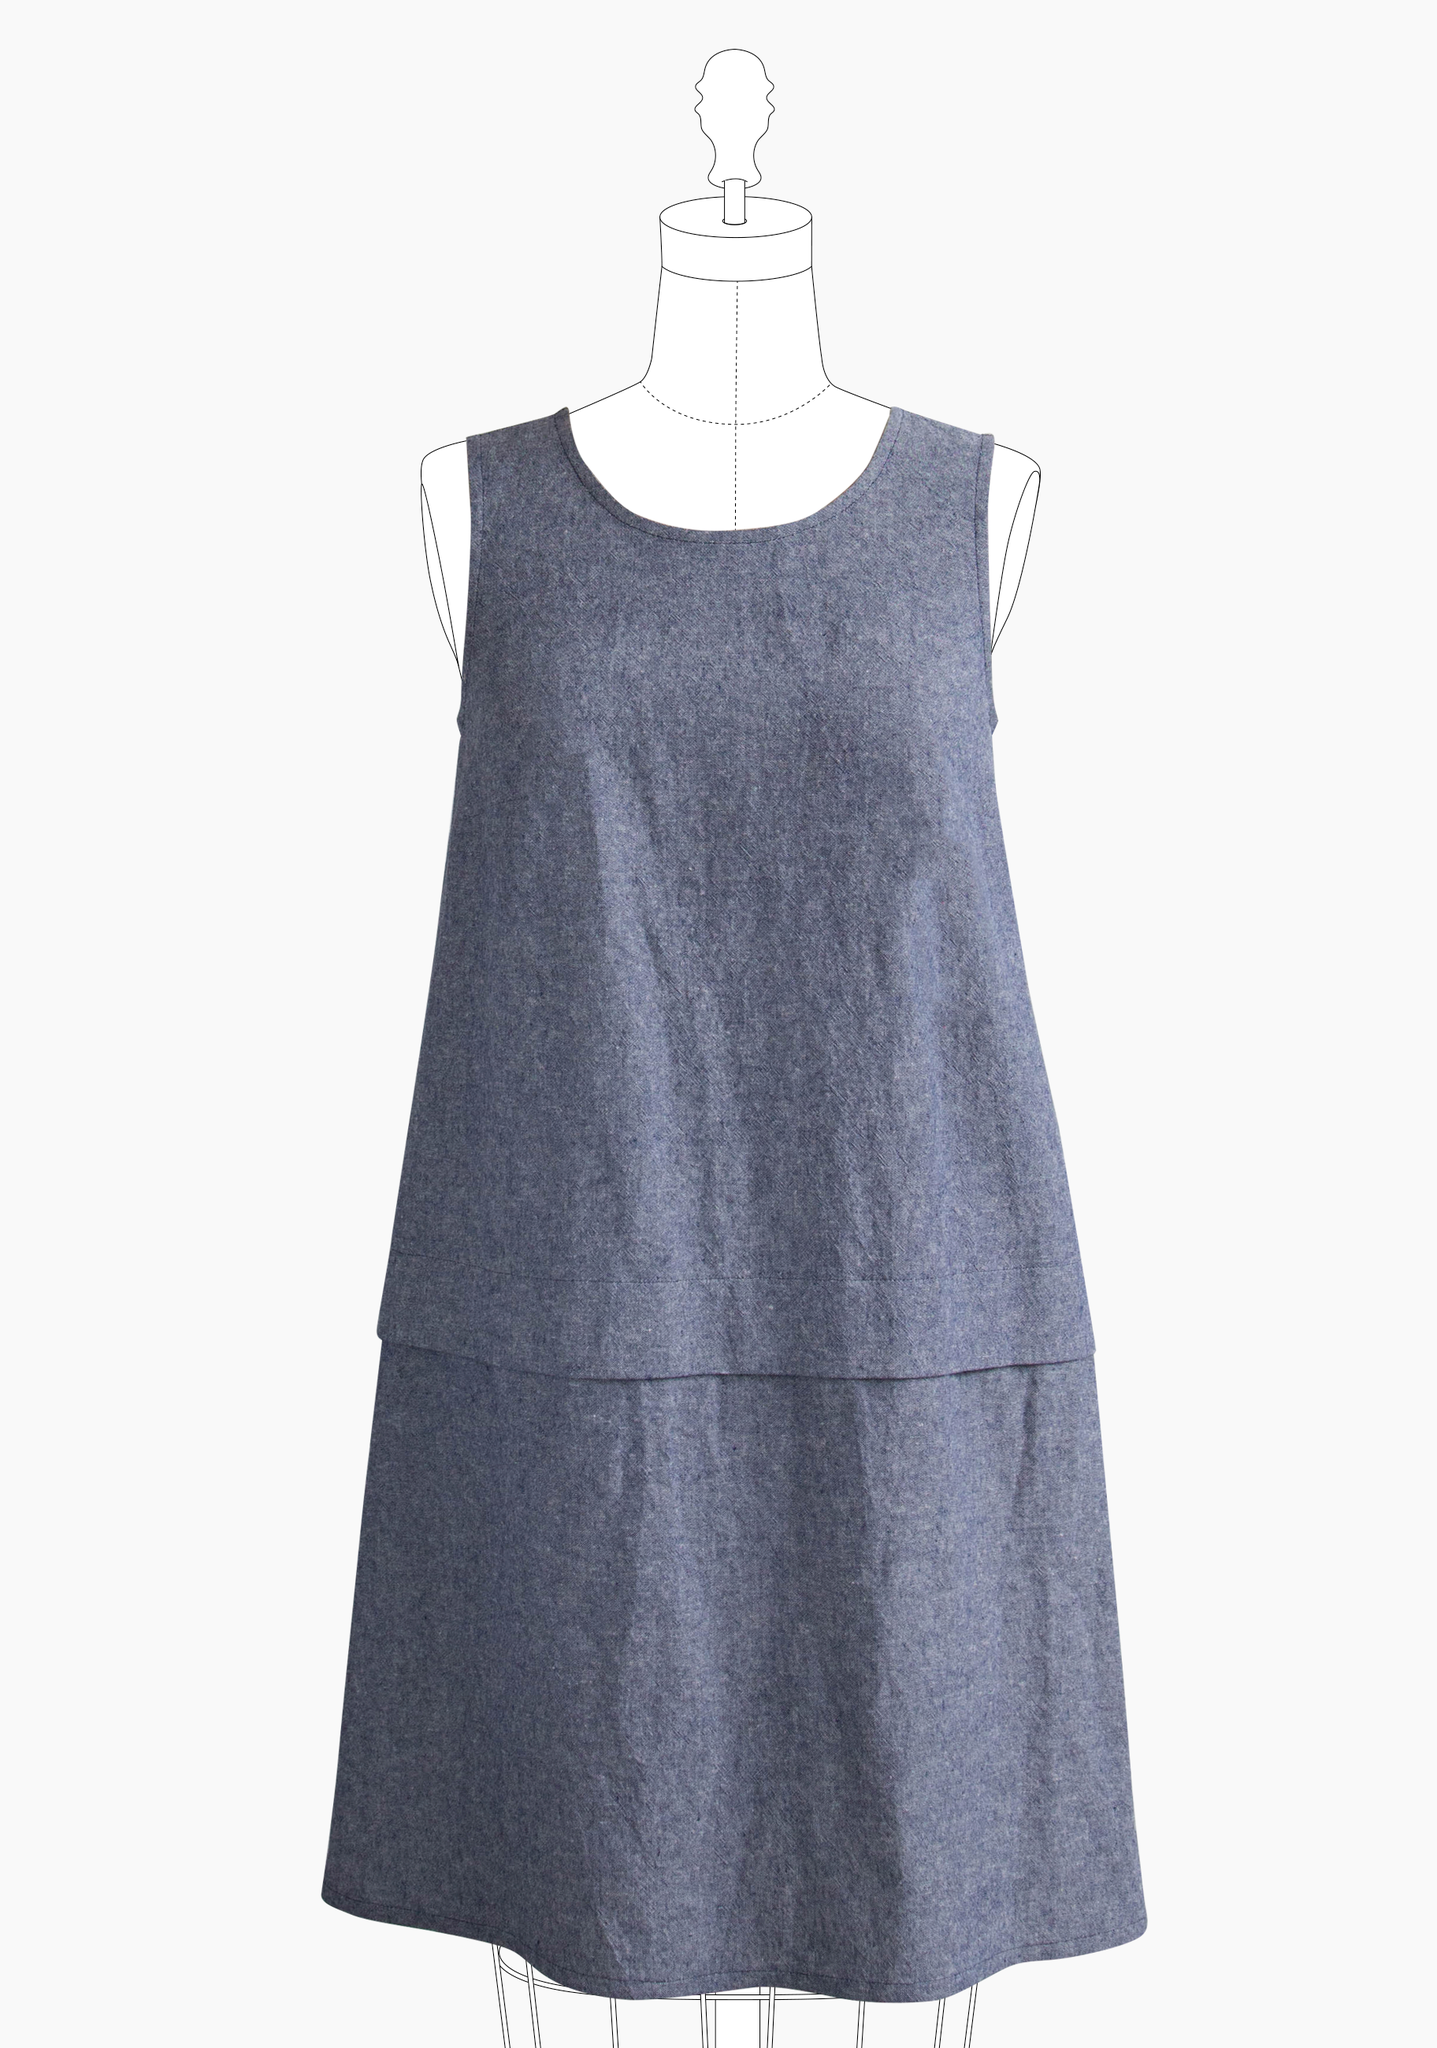 Willow Tank & Dress | Textillia | Online sewing community and database